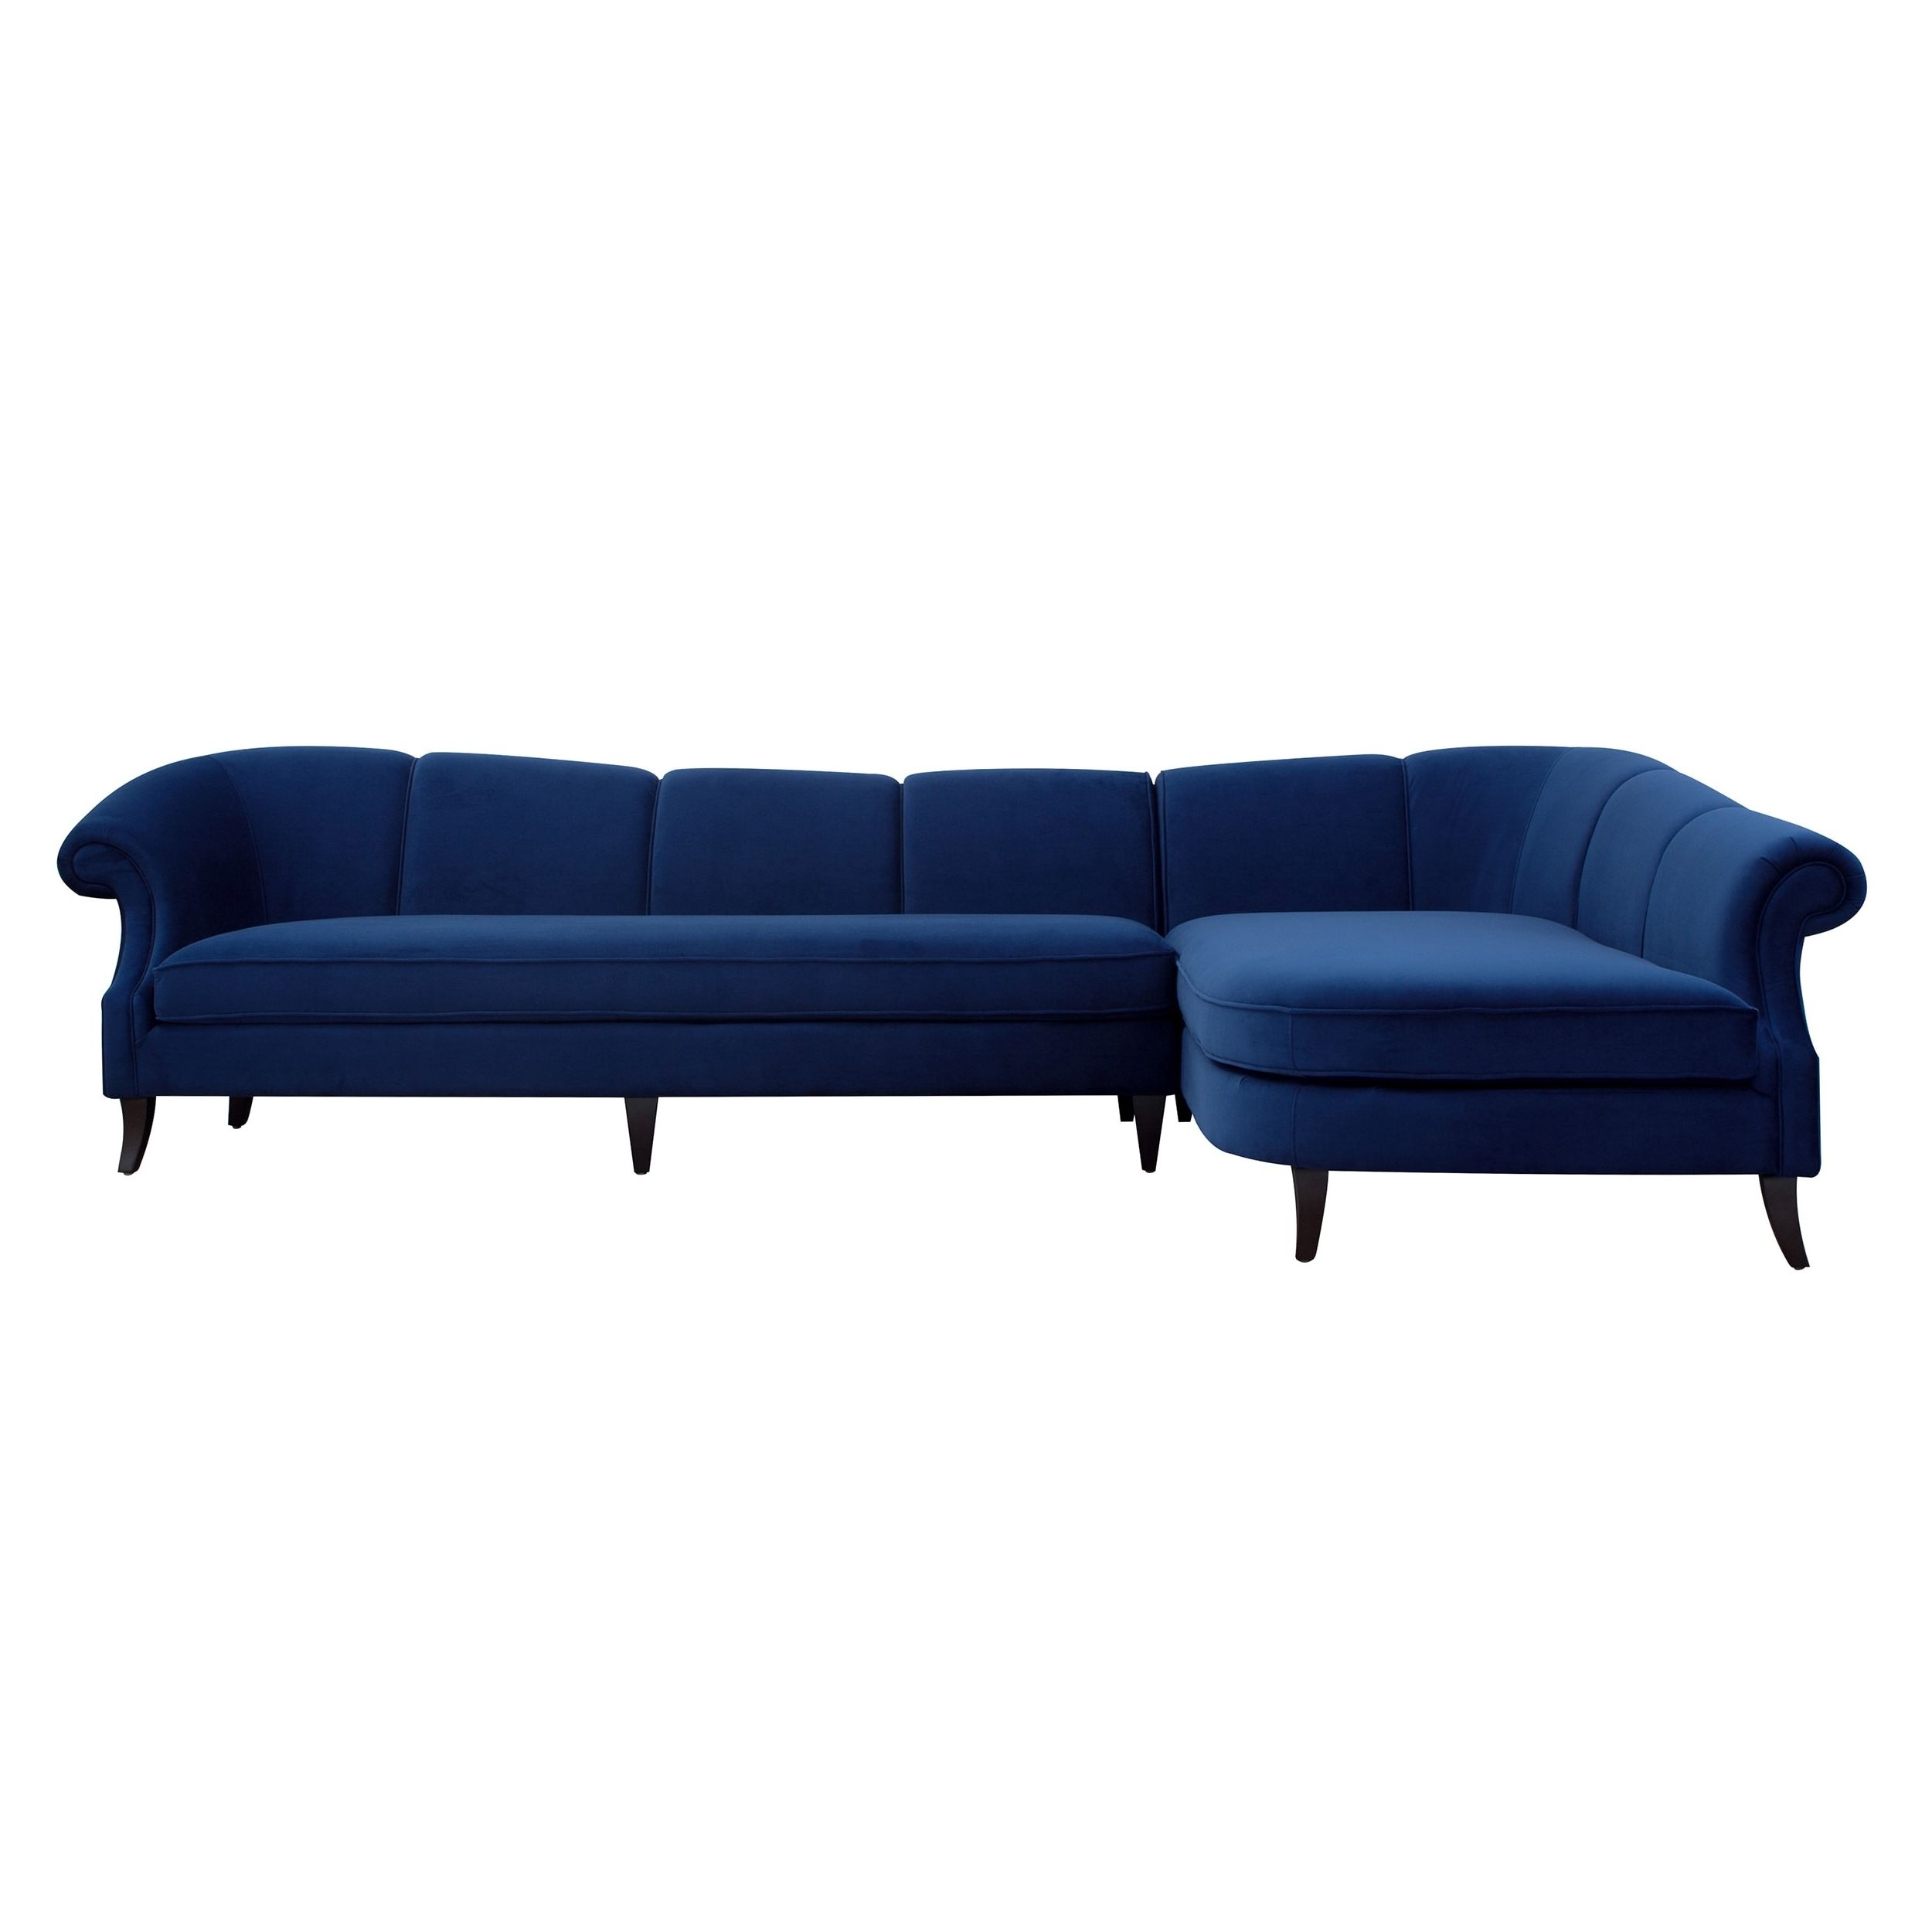 Favorite Sectional Sofas Under 700 Within Jennifer Taylor Victoria Upholstered Sectional Sofa – Free (View 14 of 15)